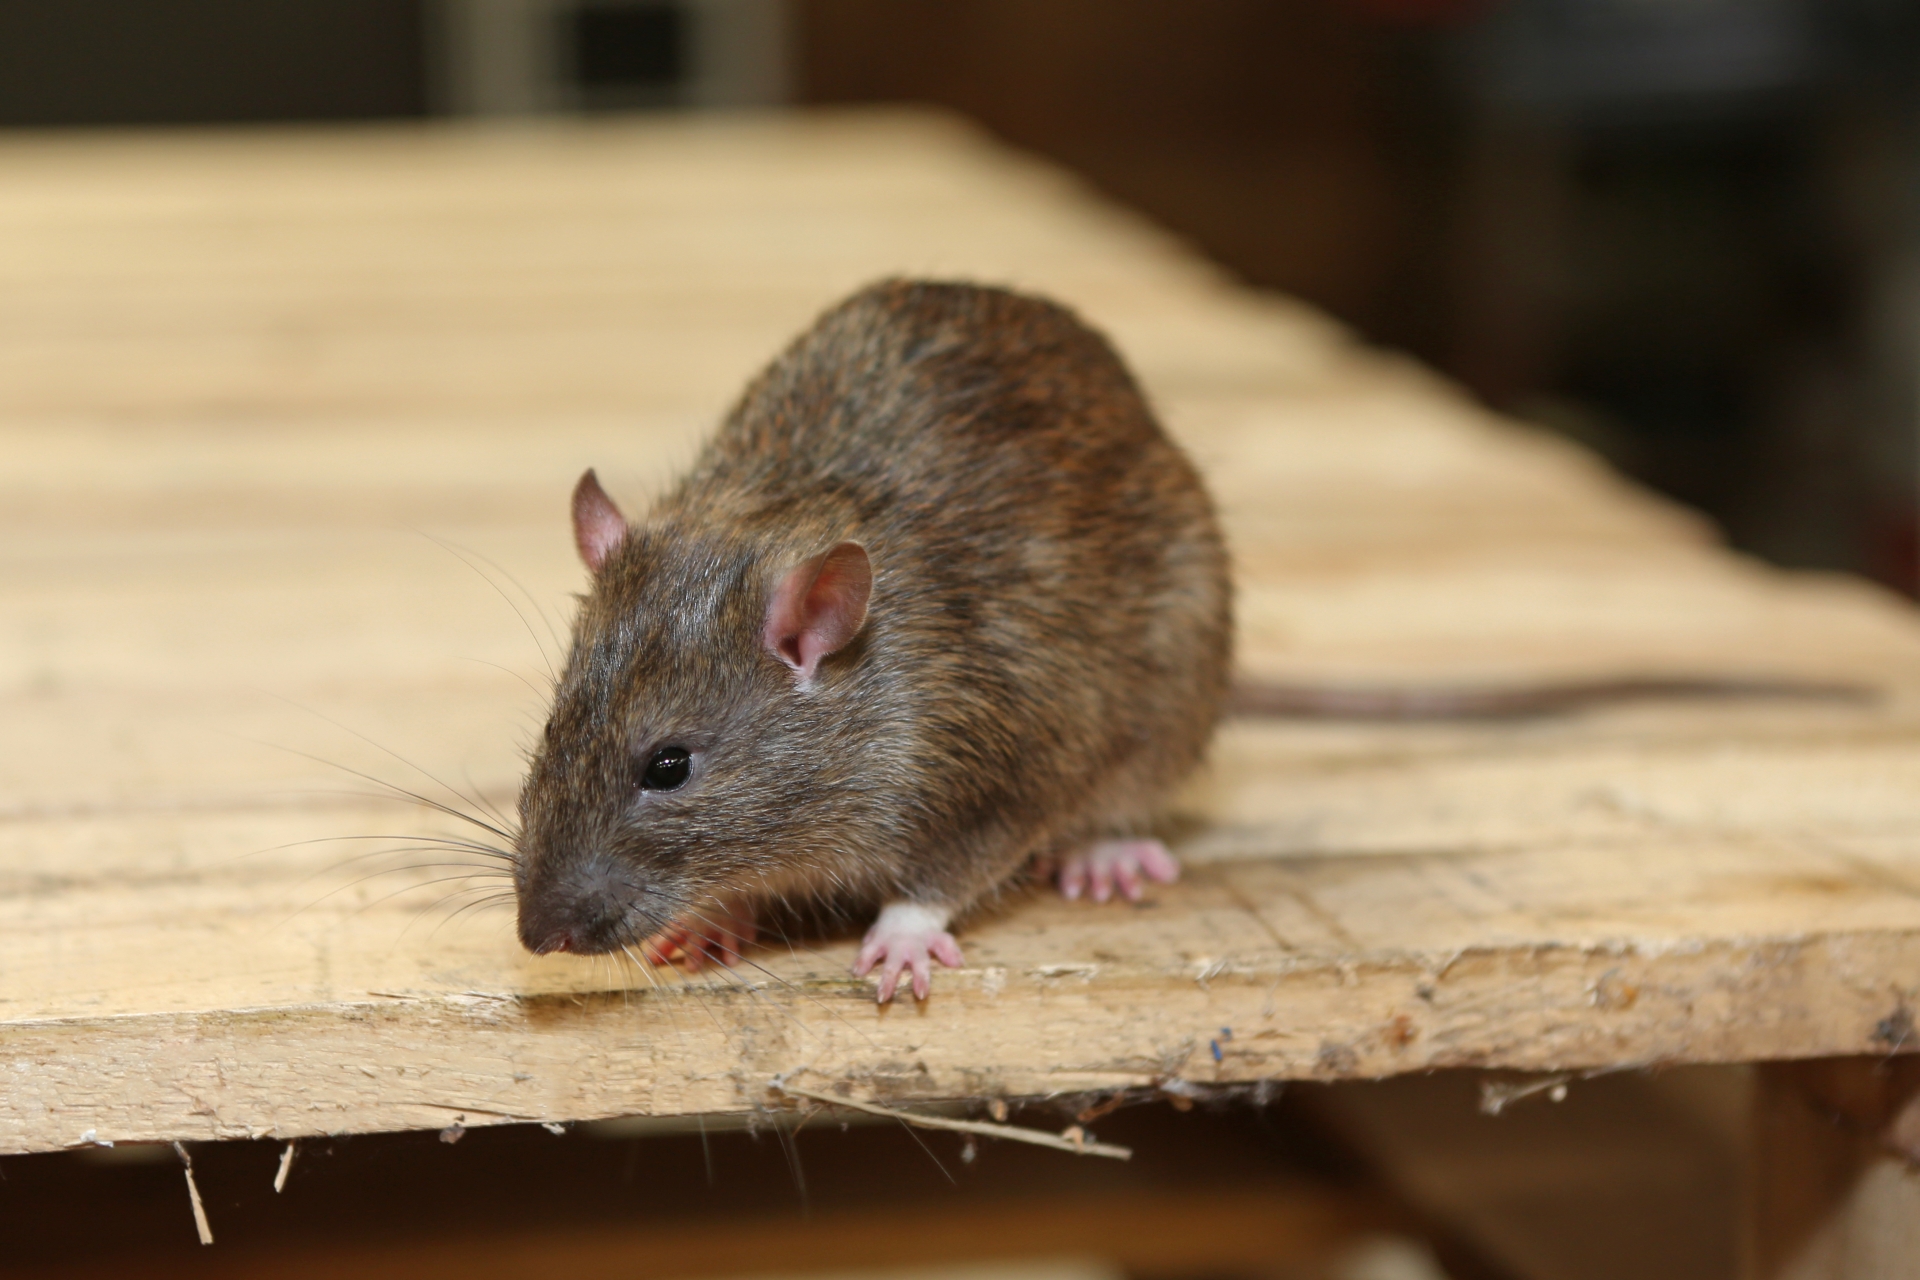 Rat extermination, Pest Control in Coulsdon, Old Coulsdon, Chipstead, CR5. Call Now 020 8166 9746